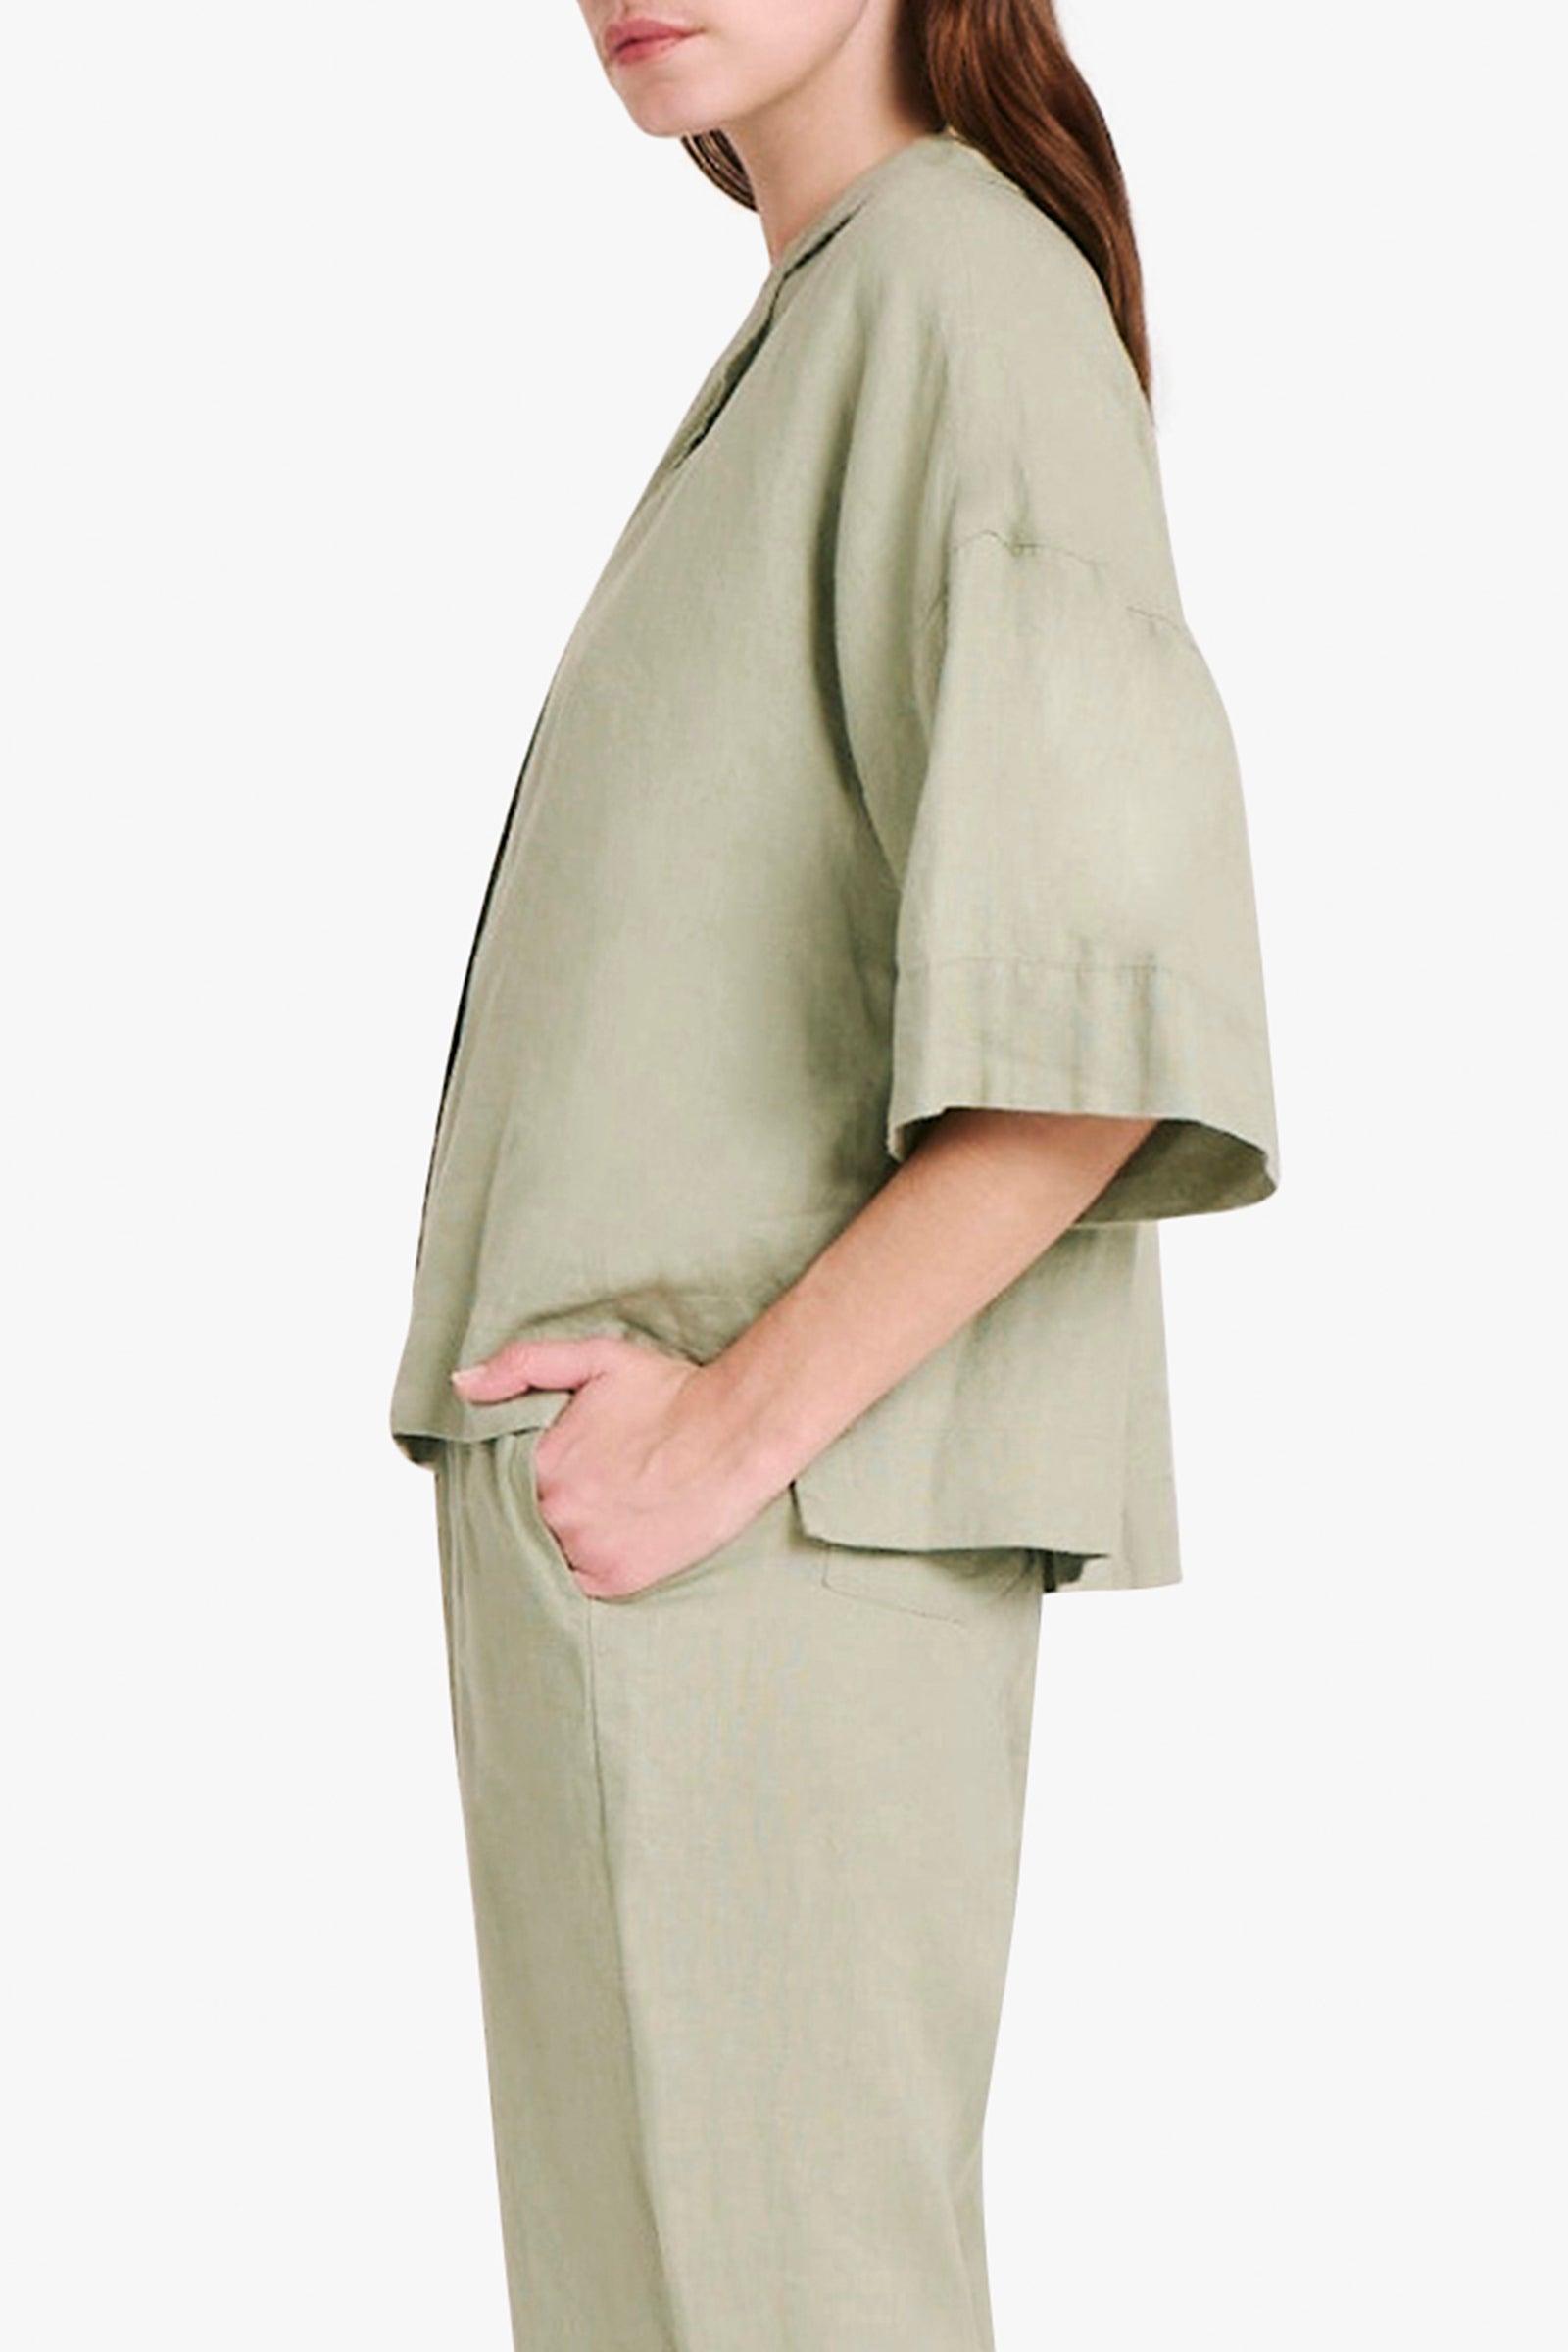 Nude Lucy Lounge Linen Shirt Pant Set in Olive